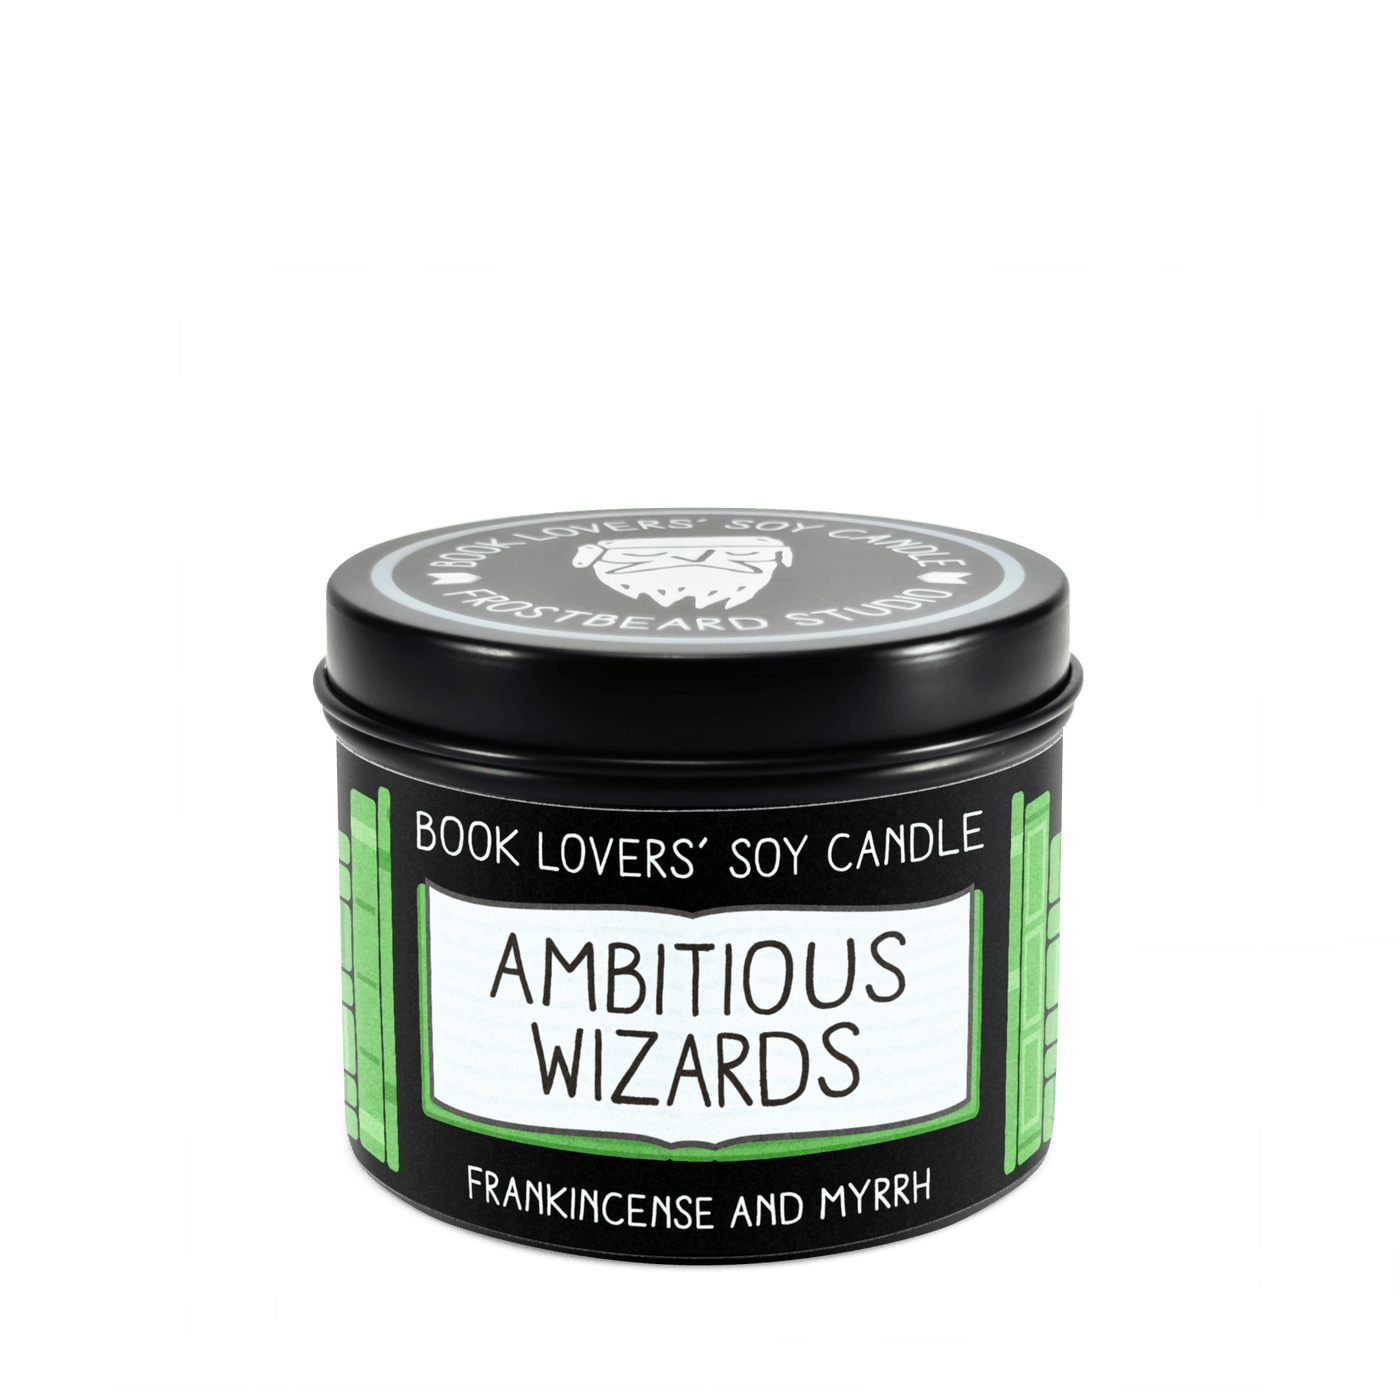 Ambitious Wizards - 4 oz Tin - Book Lovers' Soy Candle - Frostbeard Studio